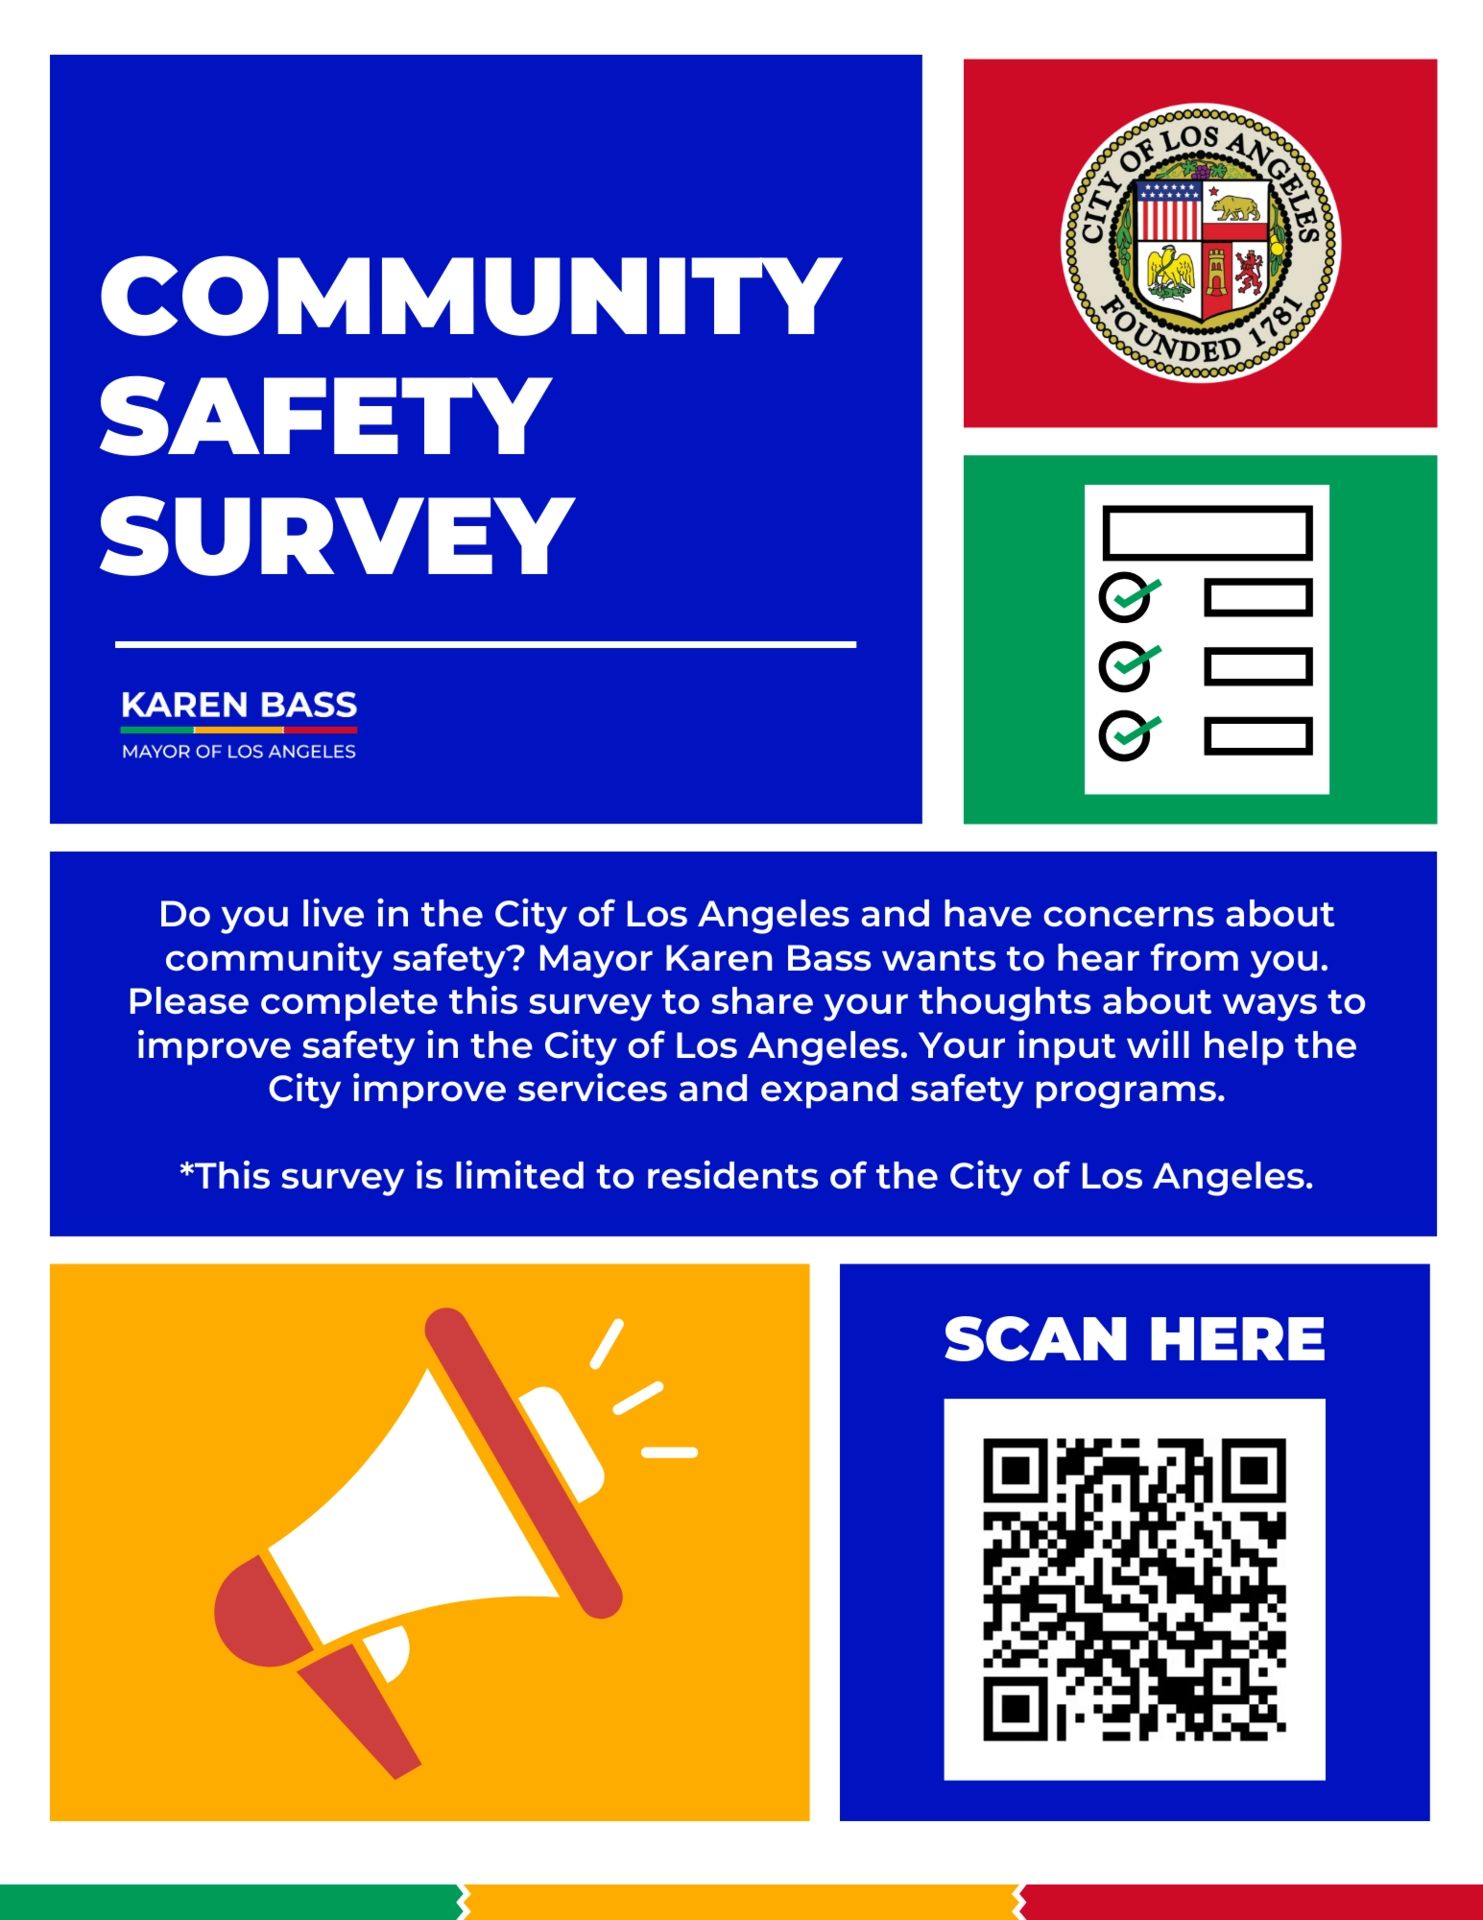 Do you live in the City of Los Angeles and have concerns about community safety? Mayor Karen Bass wants to hear from you. Please complete this survey to share your thoughts about ways to improve safety in the City of Los Angeles. Your inpur will help the City improve services and expand safety programs. This survey is limited to residents of the City of Los Angeles. 